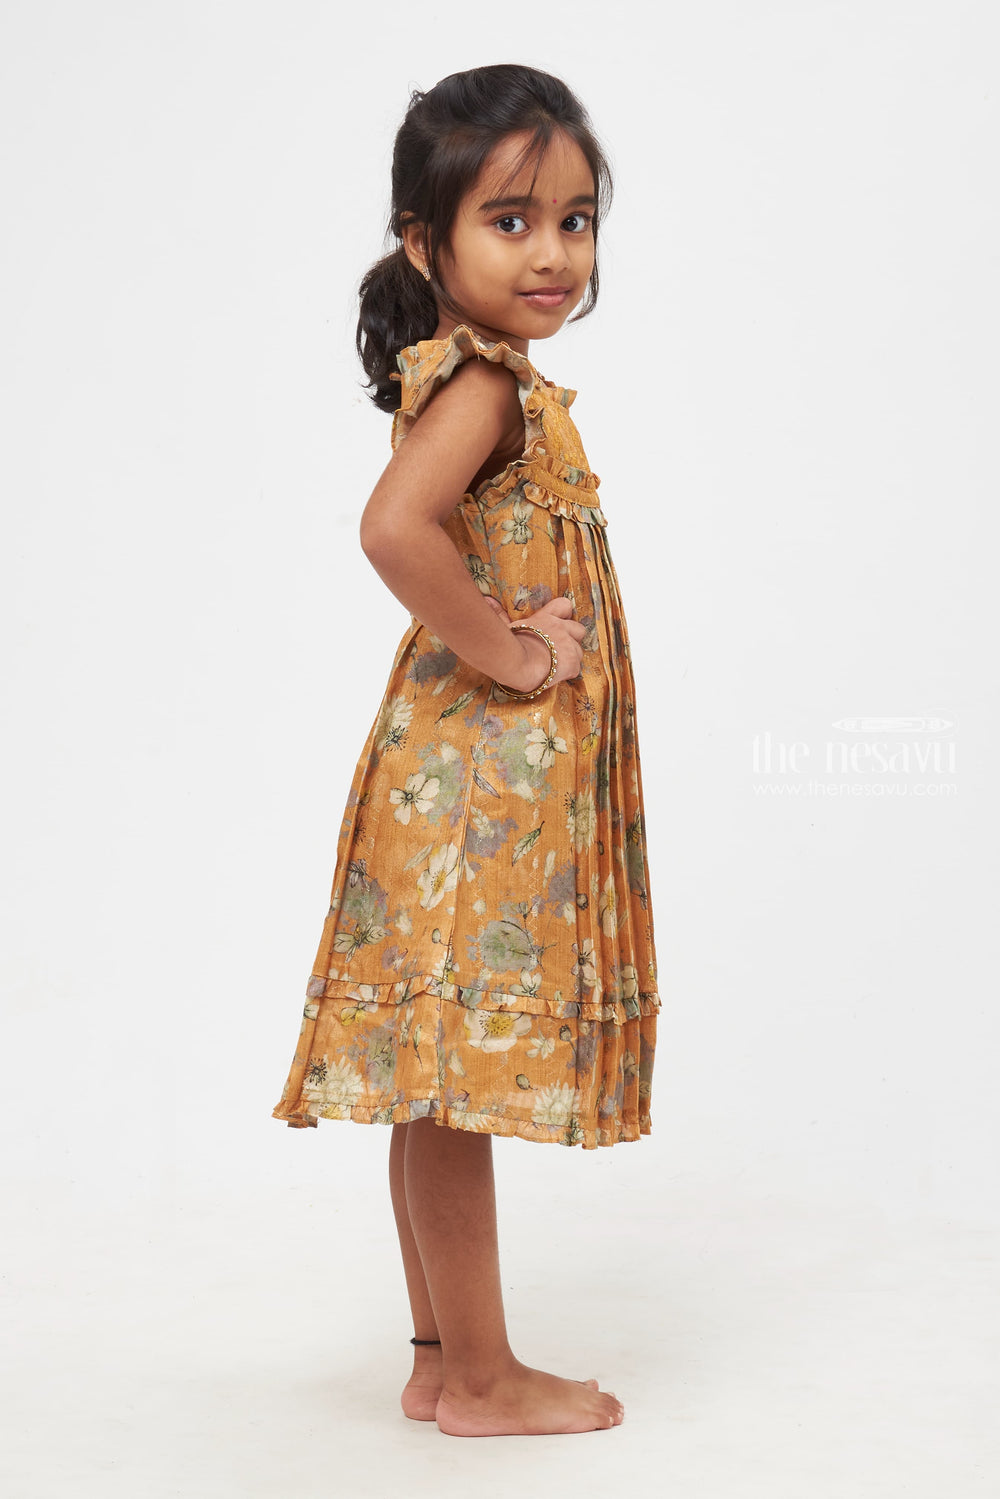 The Nesavu Girls Cotton Frock Sunlit Garden Elegance : Charming Floral-Printed Yellow Frock for Girls Nesavu Exquisite Floral-Printed Yellow Frock for Girls | The Nesavu